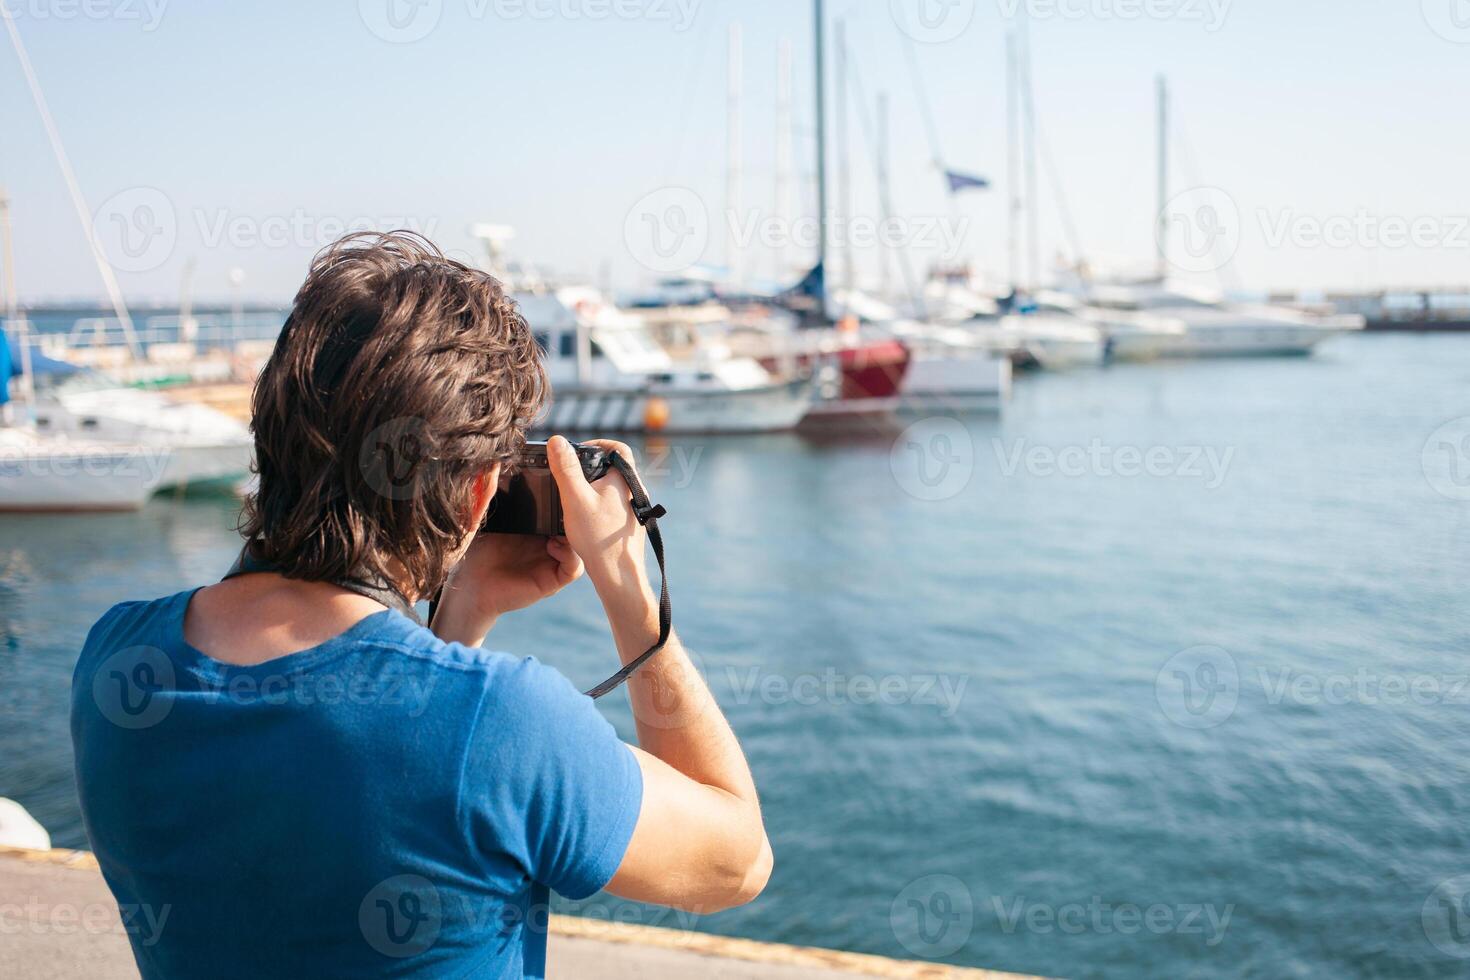 Tourist in seaport. Yachts in the parking lot, seaport in Odessa, Black Sea. Sailing, rich lifestyle, beach holidays. Business rental of boats, riding tourists on the waves. sunny day, photographer photo